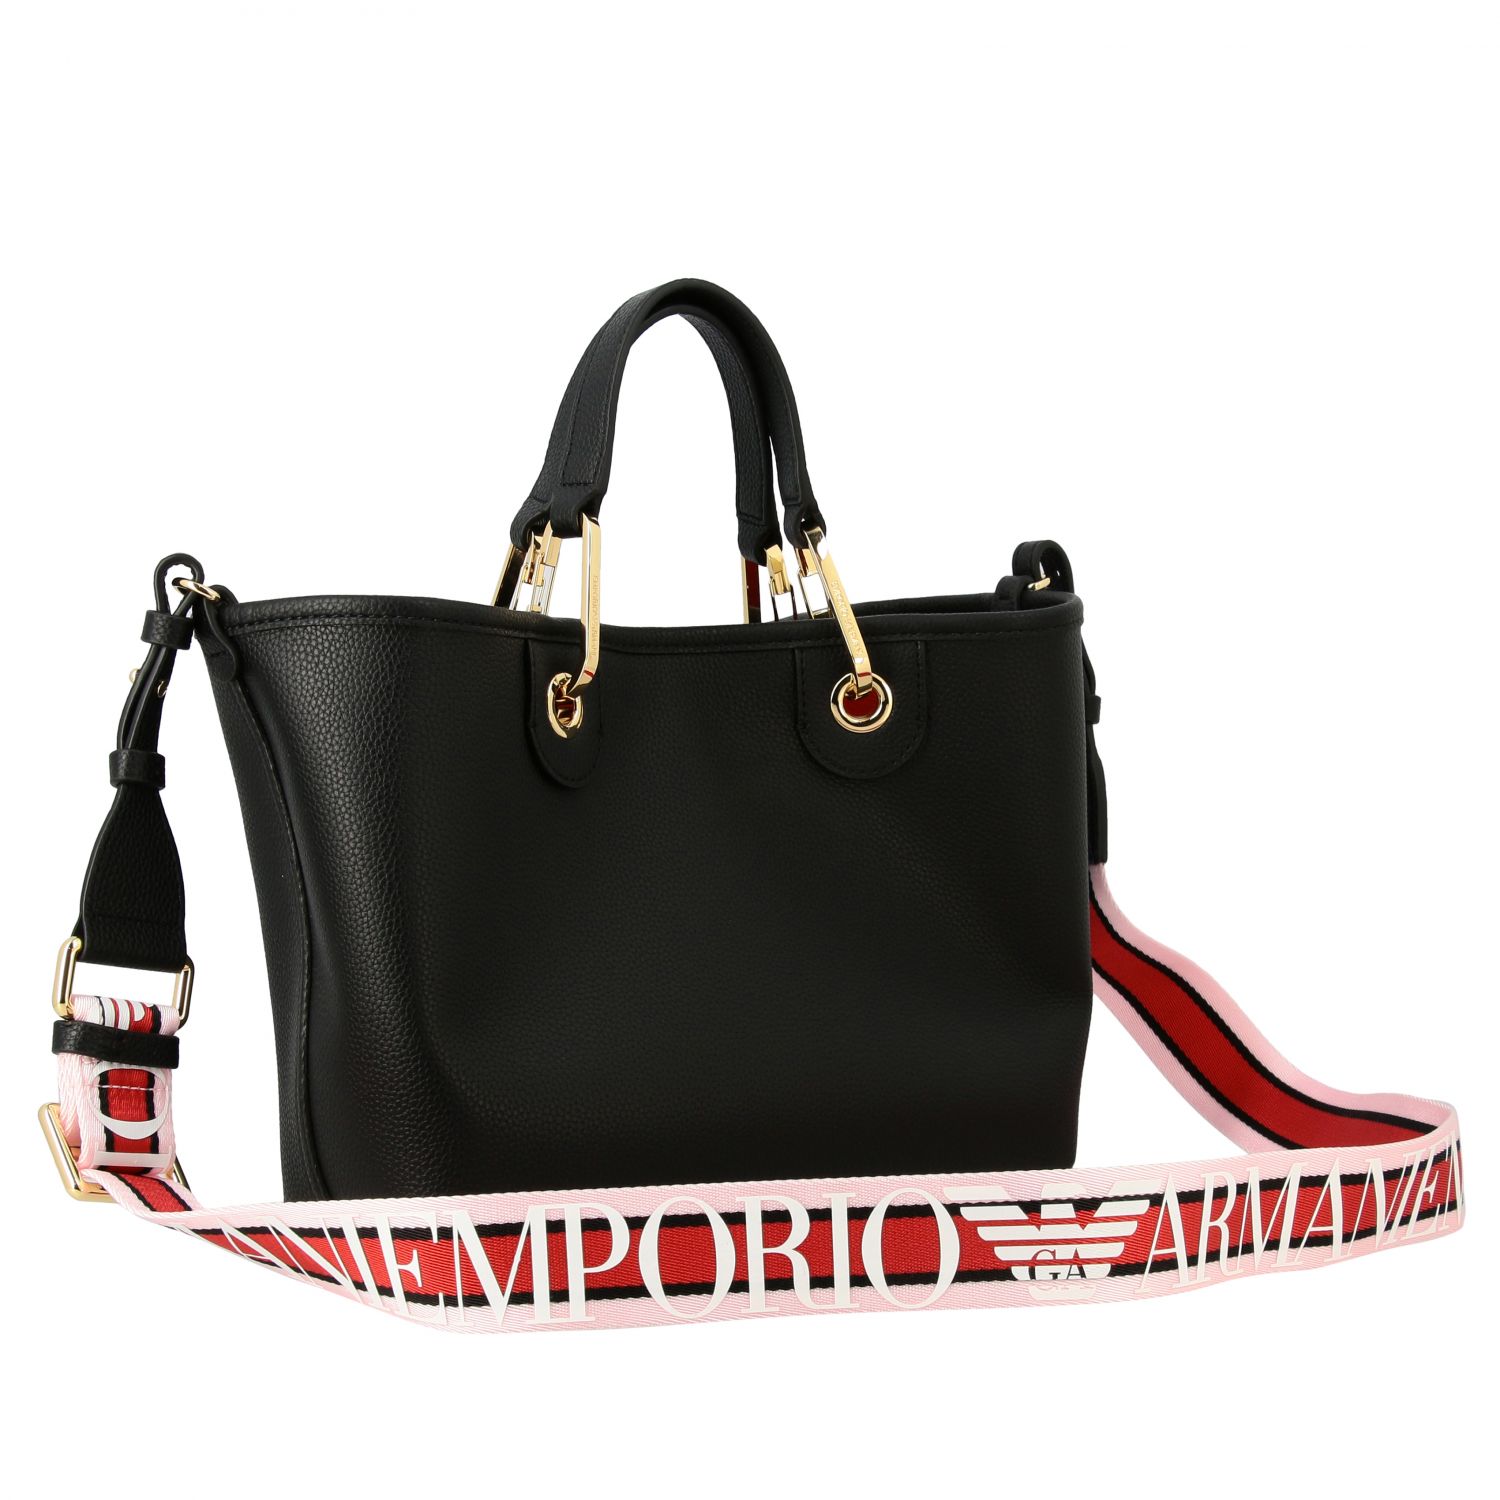 Emporio Armani Outlet: shopping bag in synthetic leather | Tote Bags ...